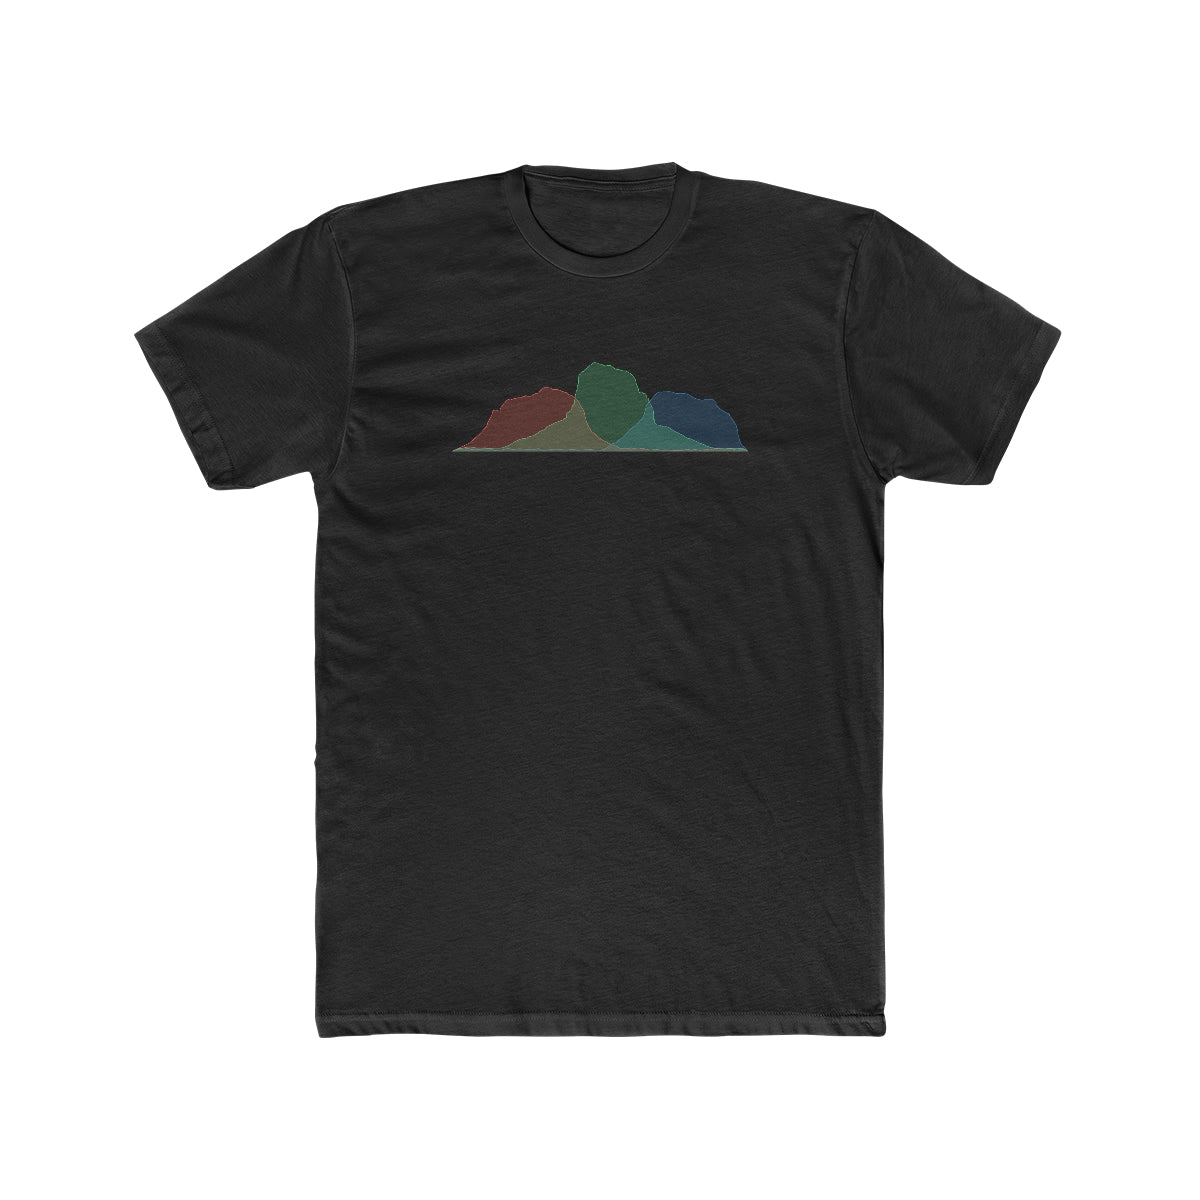 Limited Edition Guadalupe Mountains National Park T-Shirt - Histogram Design